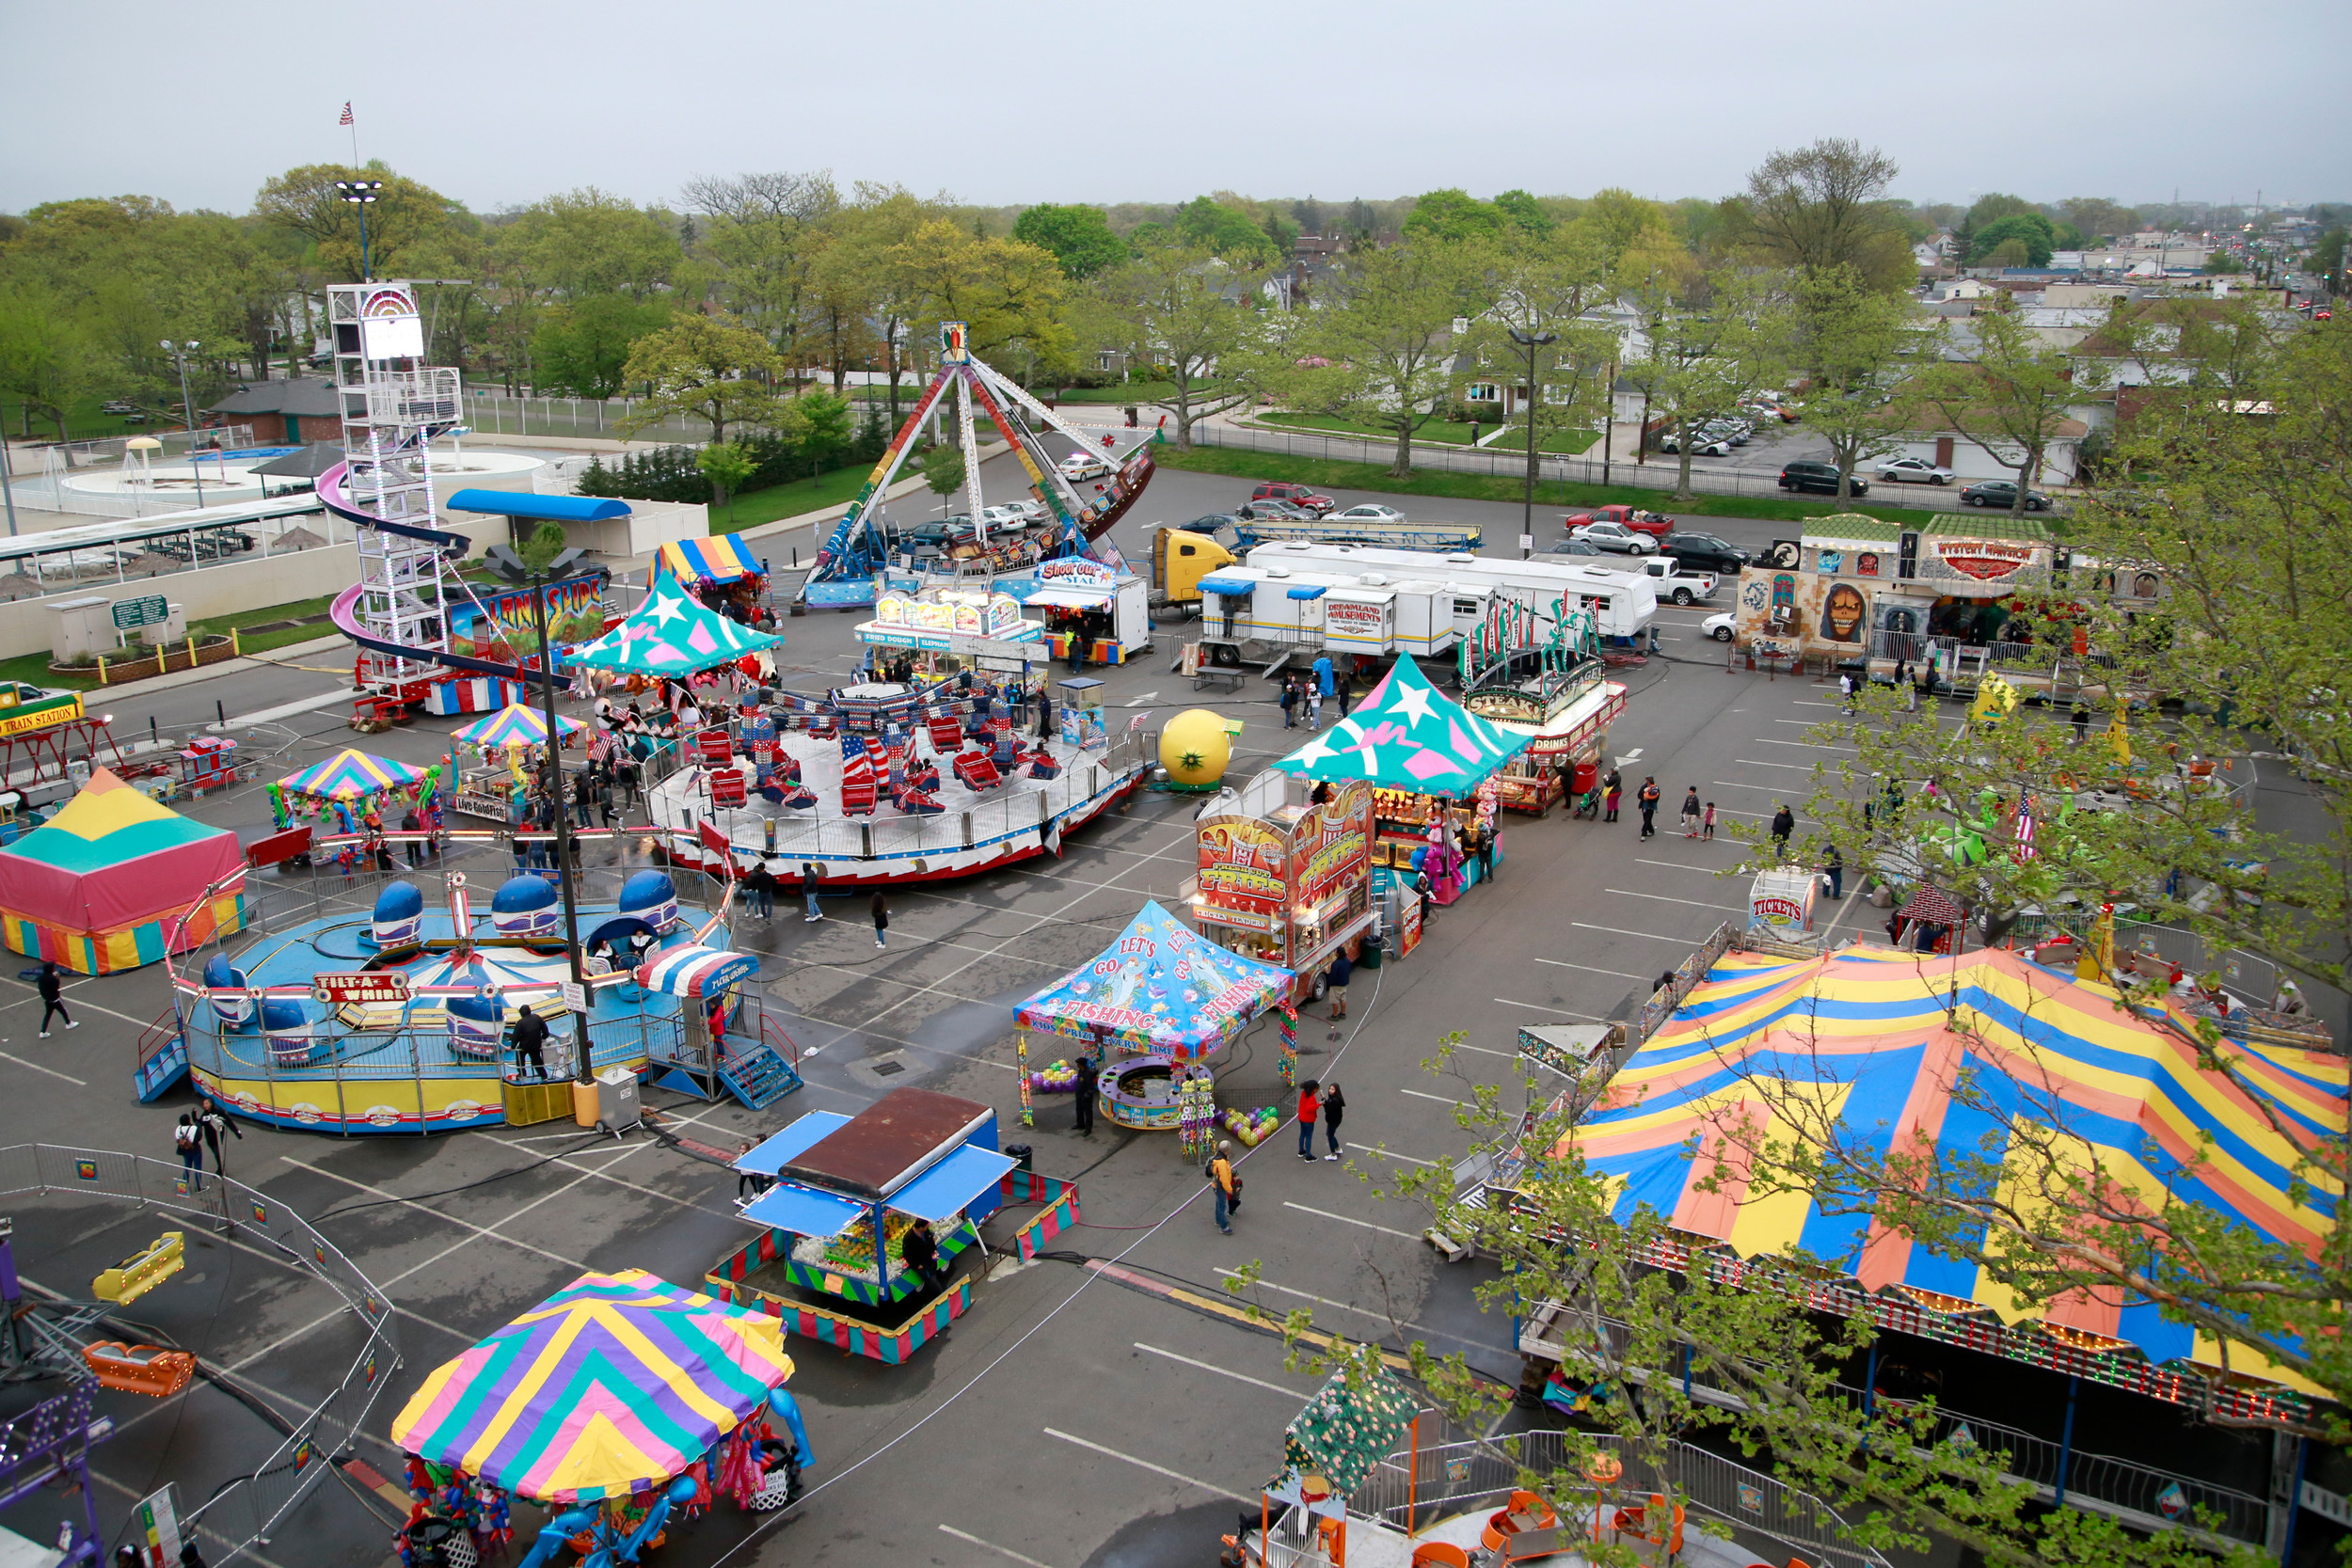 Hoping to duplicate the success of last year’s event, the Valley Stream Presbyterian Church is sponsoring its second carnival May 4-7 in the Arthur J. Hendrickson Park pool parking lot.